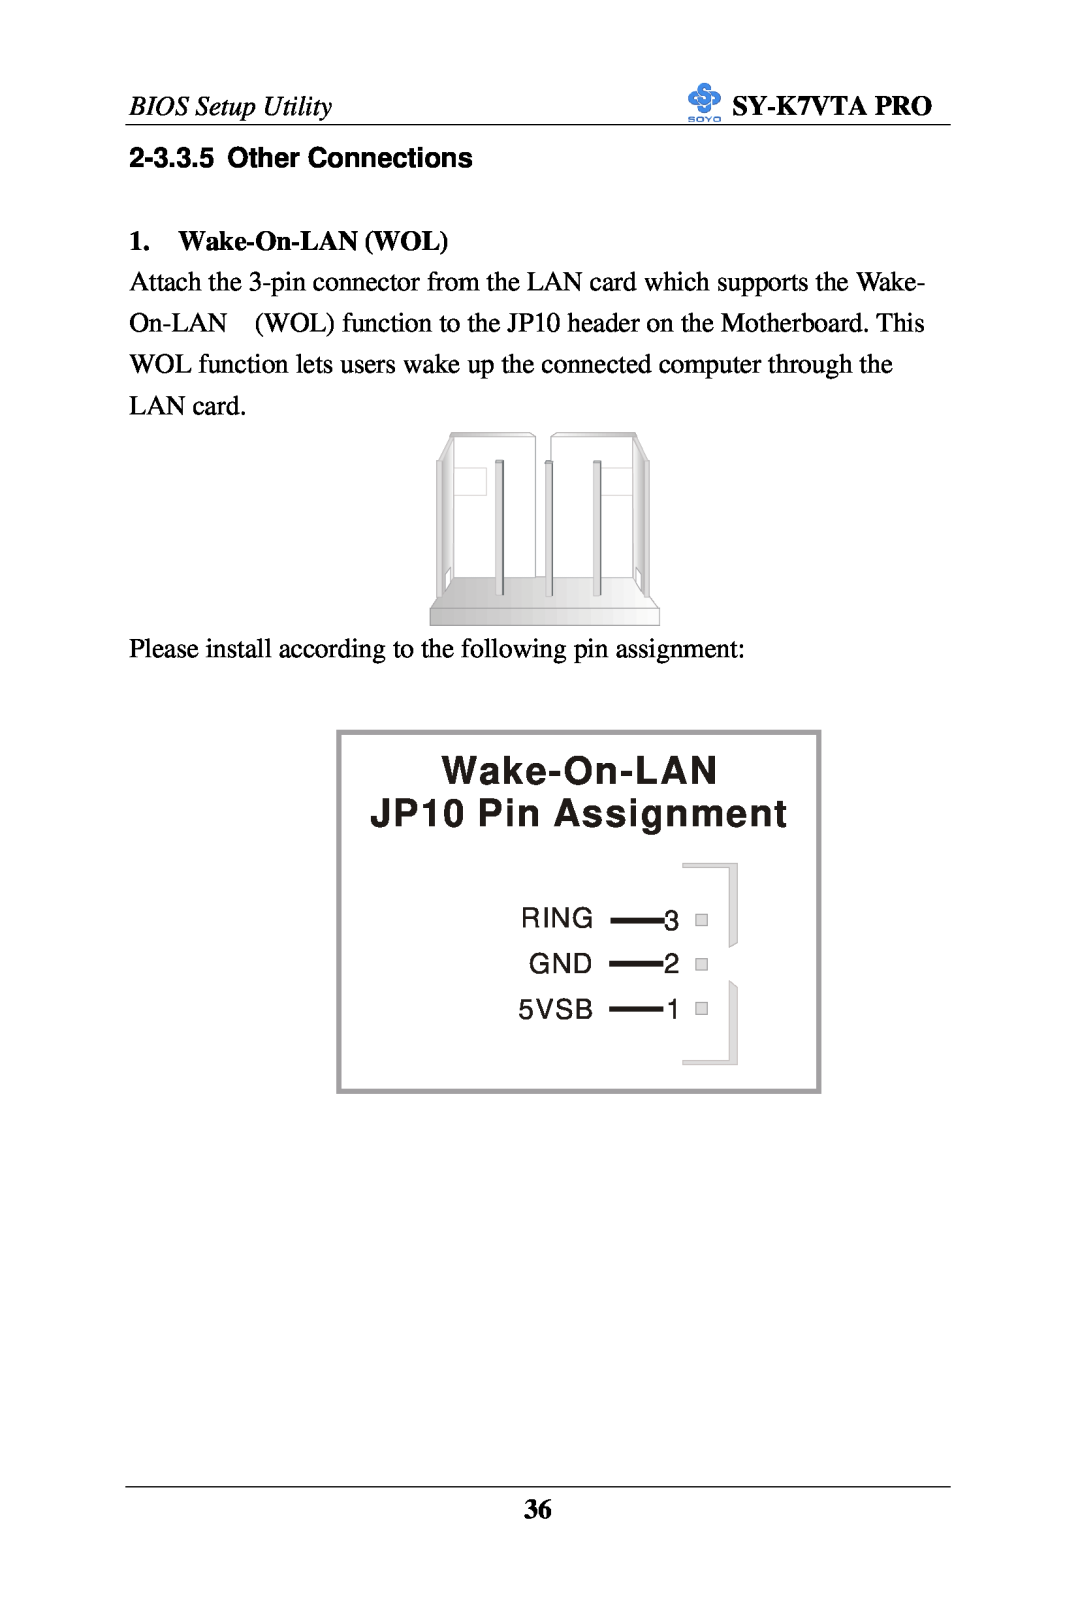 SOYO SY-K7VTA PRO user manual Other Connections, RING GND 5VSB, Wake-On-LAN JP10 Pin Assignment, BIOS Setup Utility 